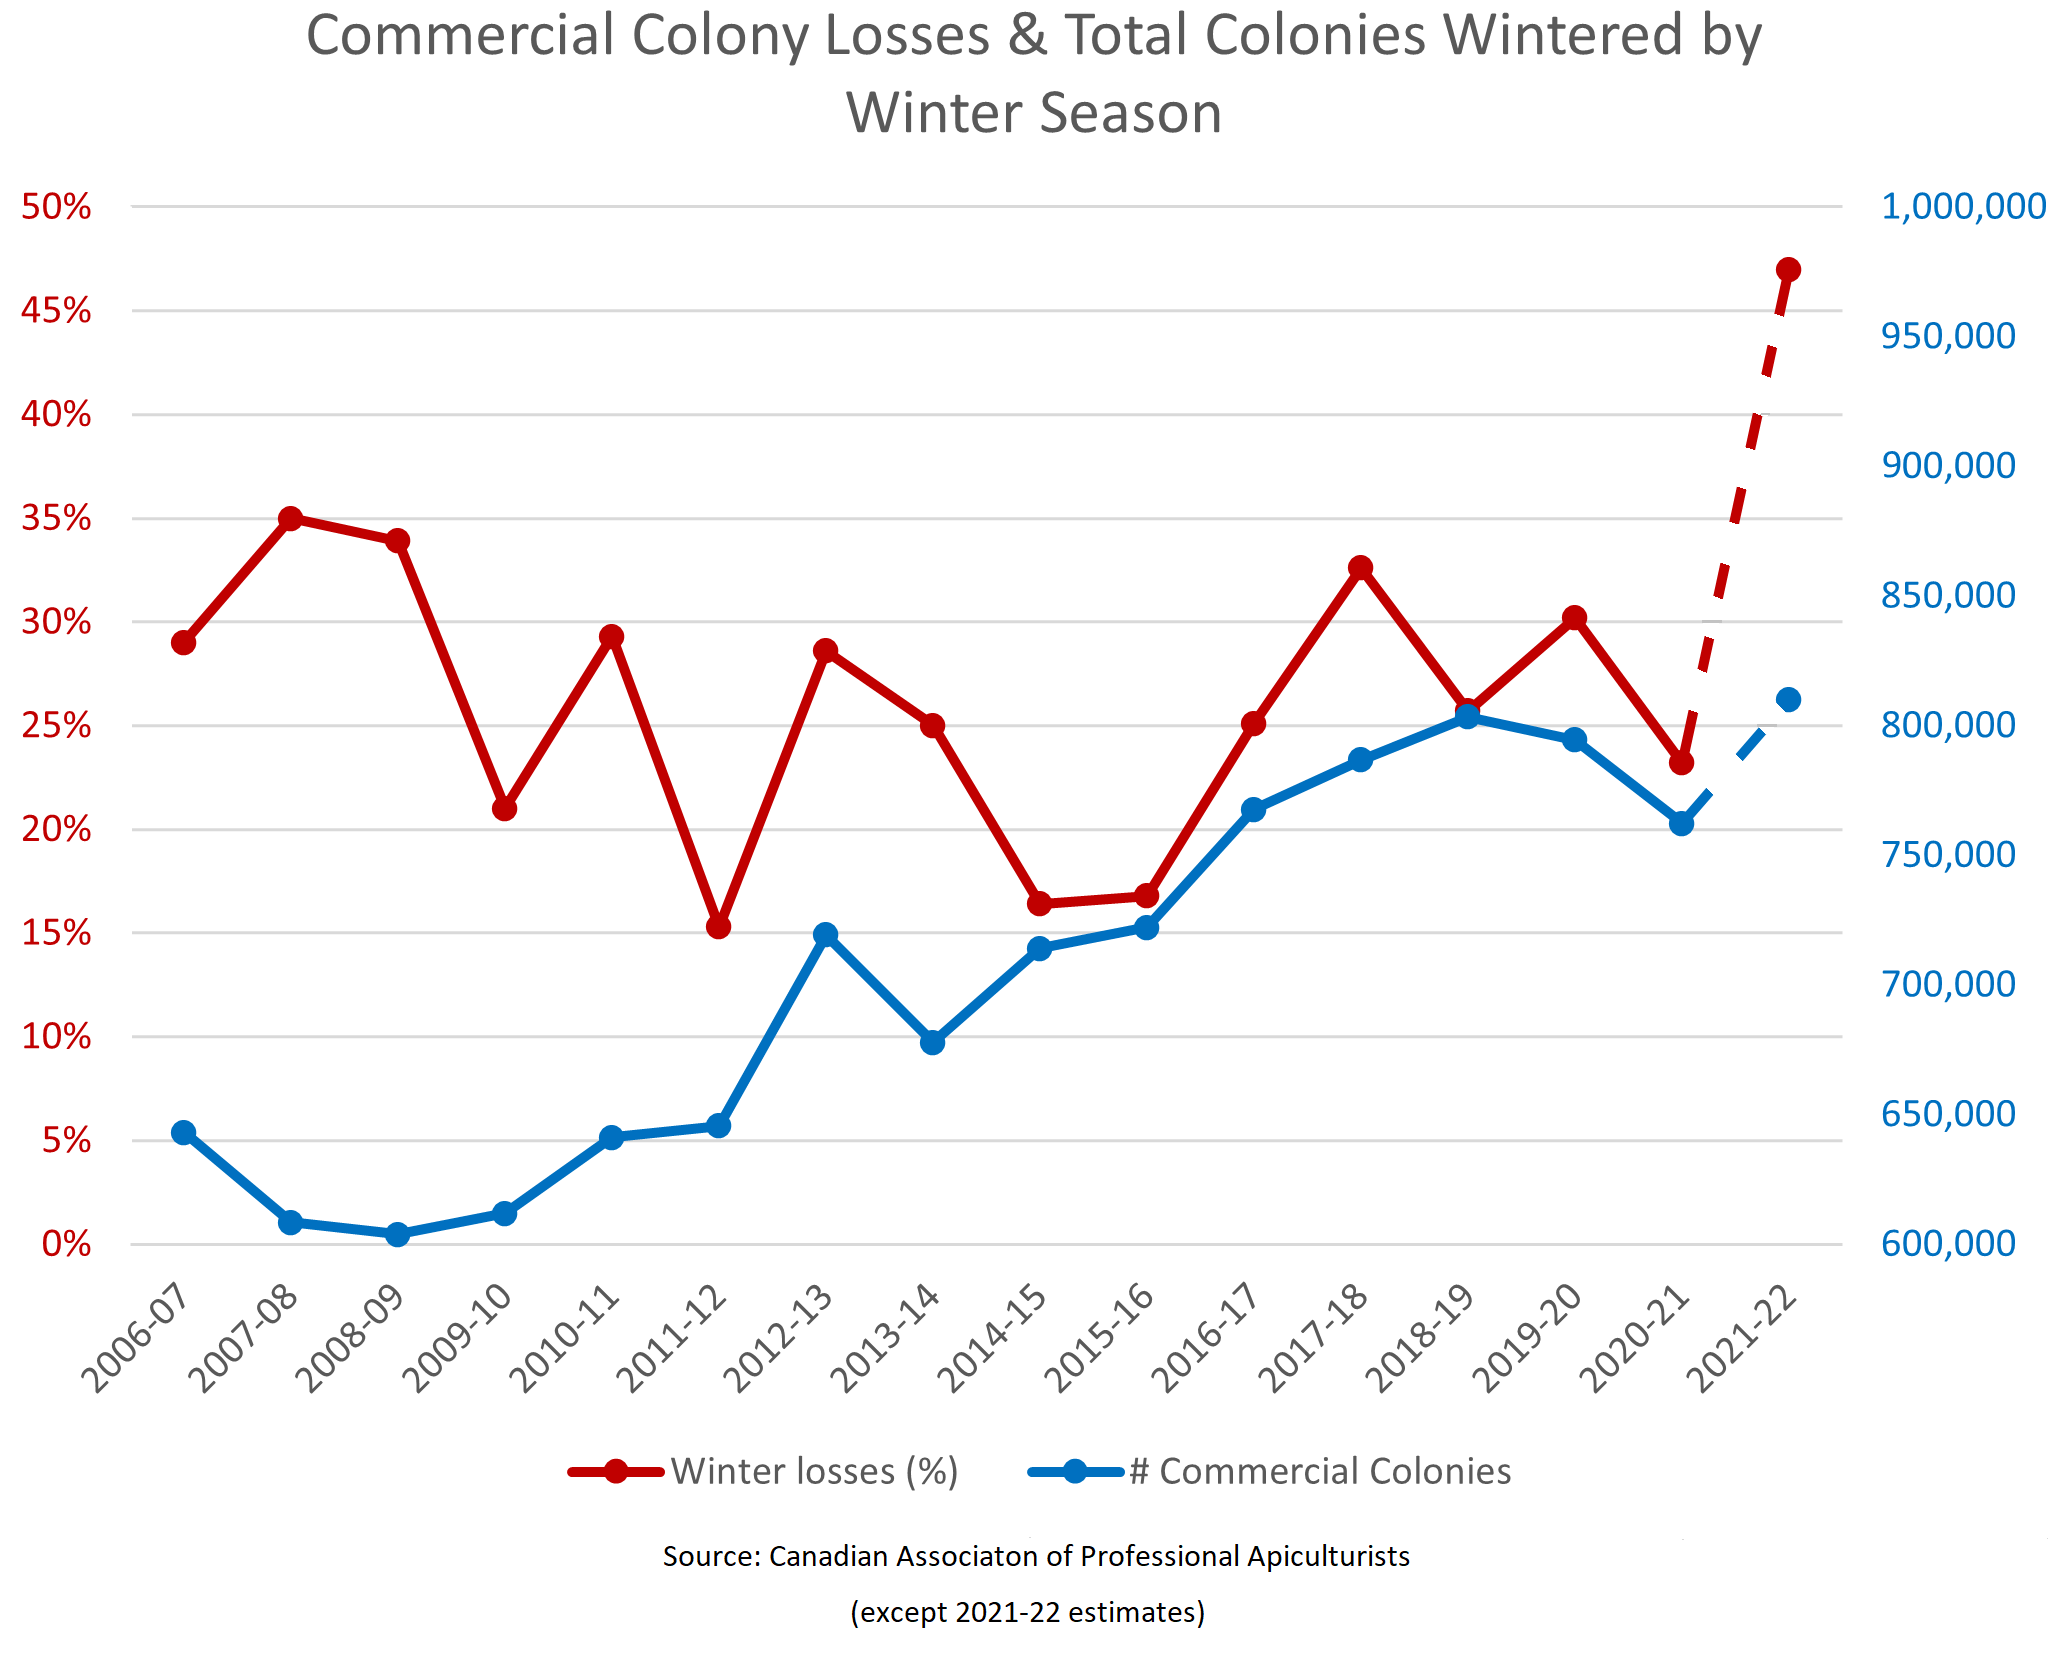 Figure 1: Canadian Commercial Honeybee Colony Winter Losses 2006-2022 (2021-2022 winter losses are estimated)